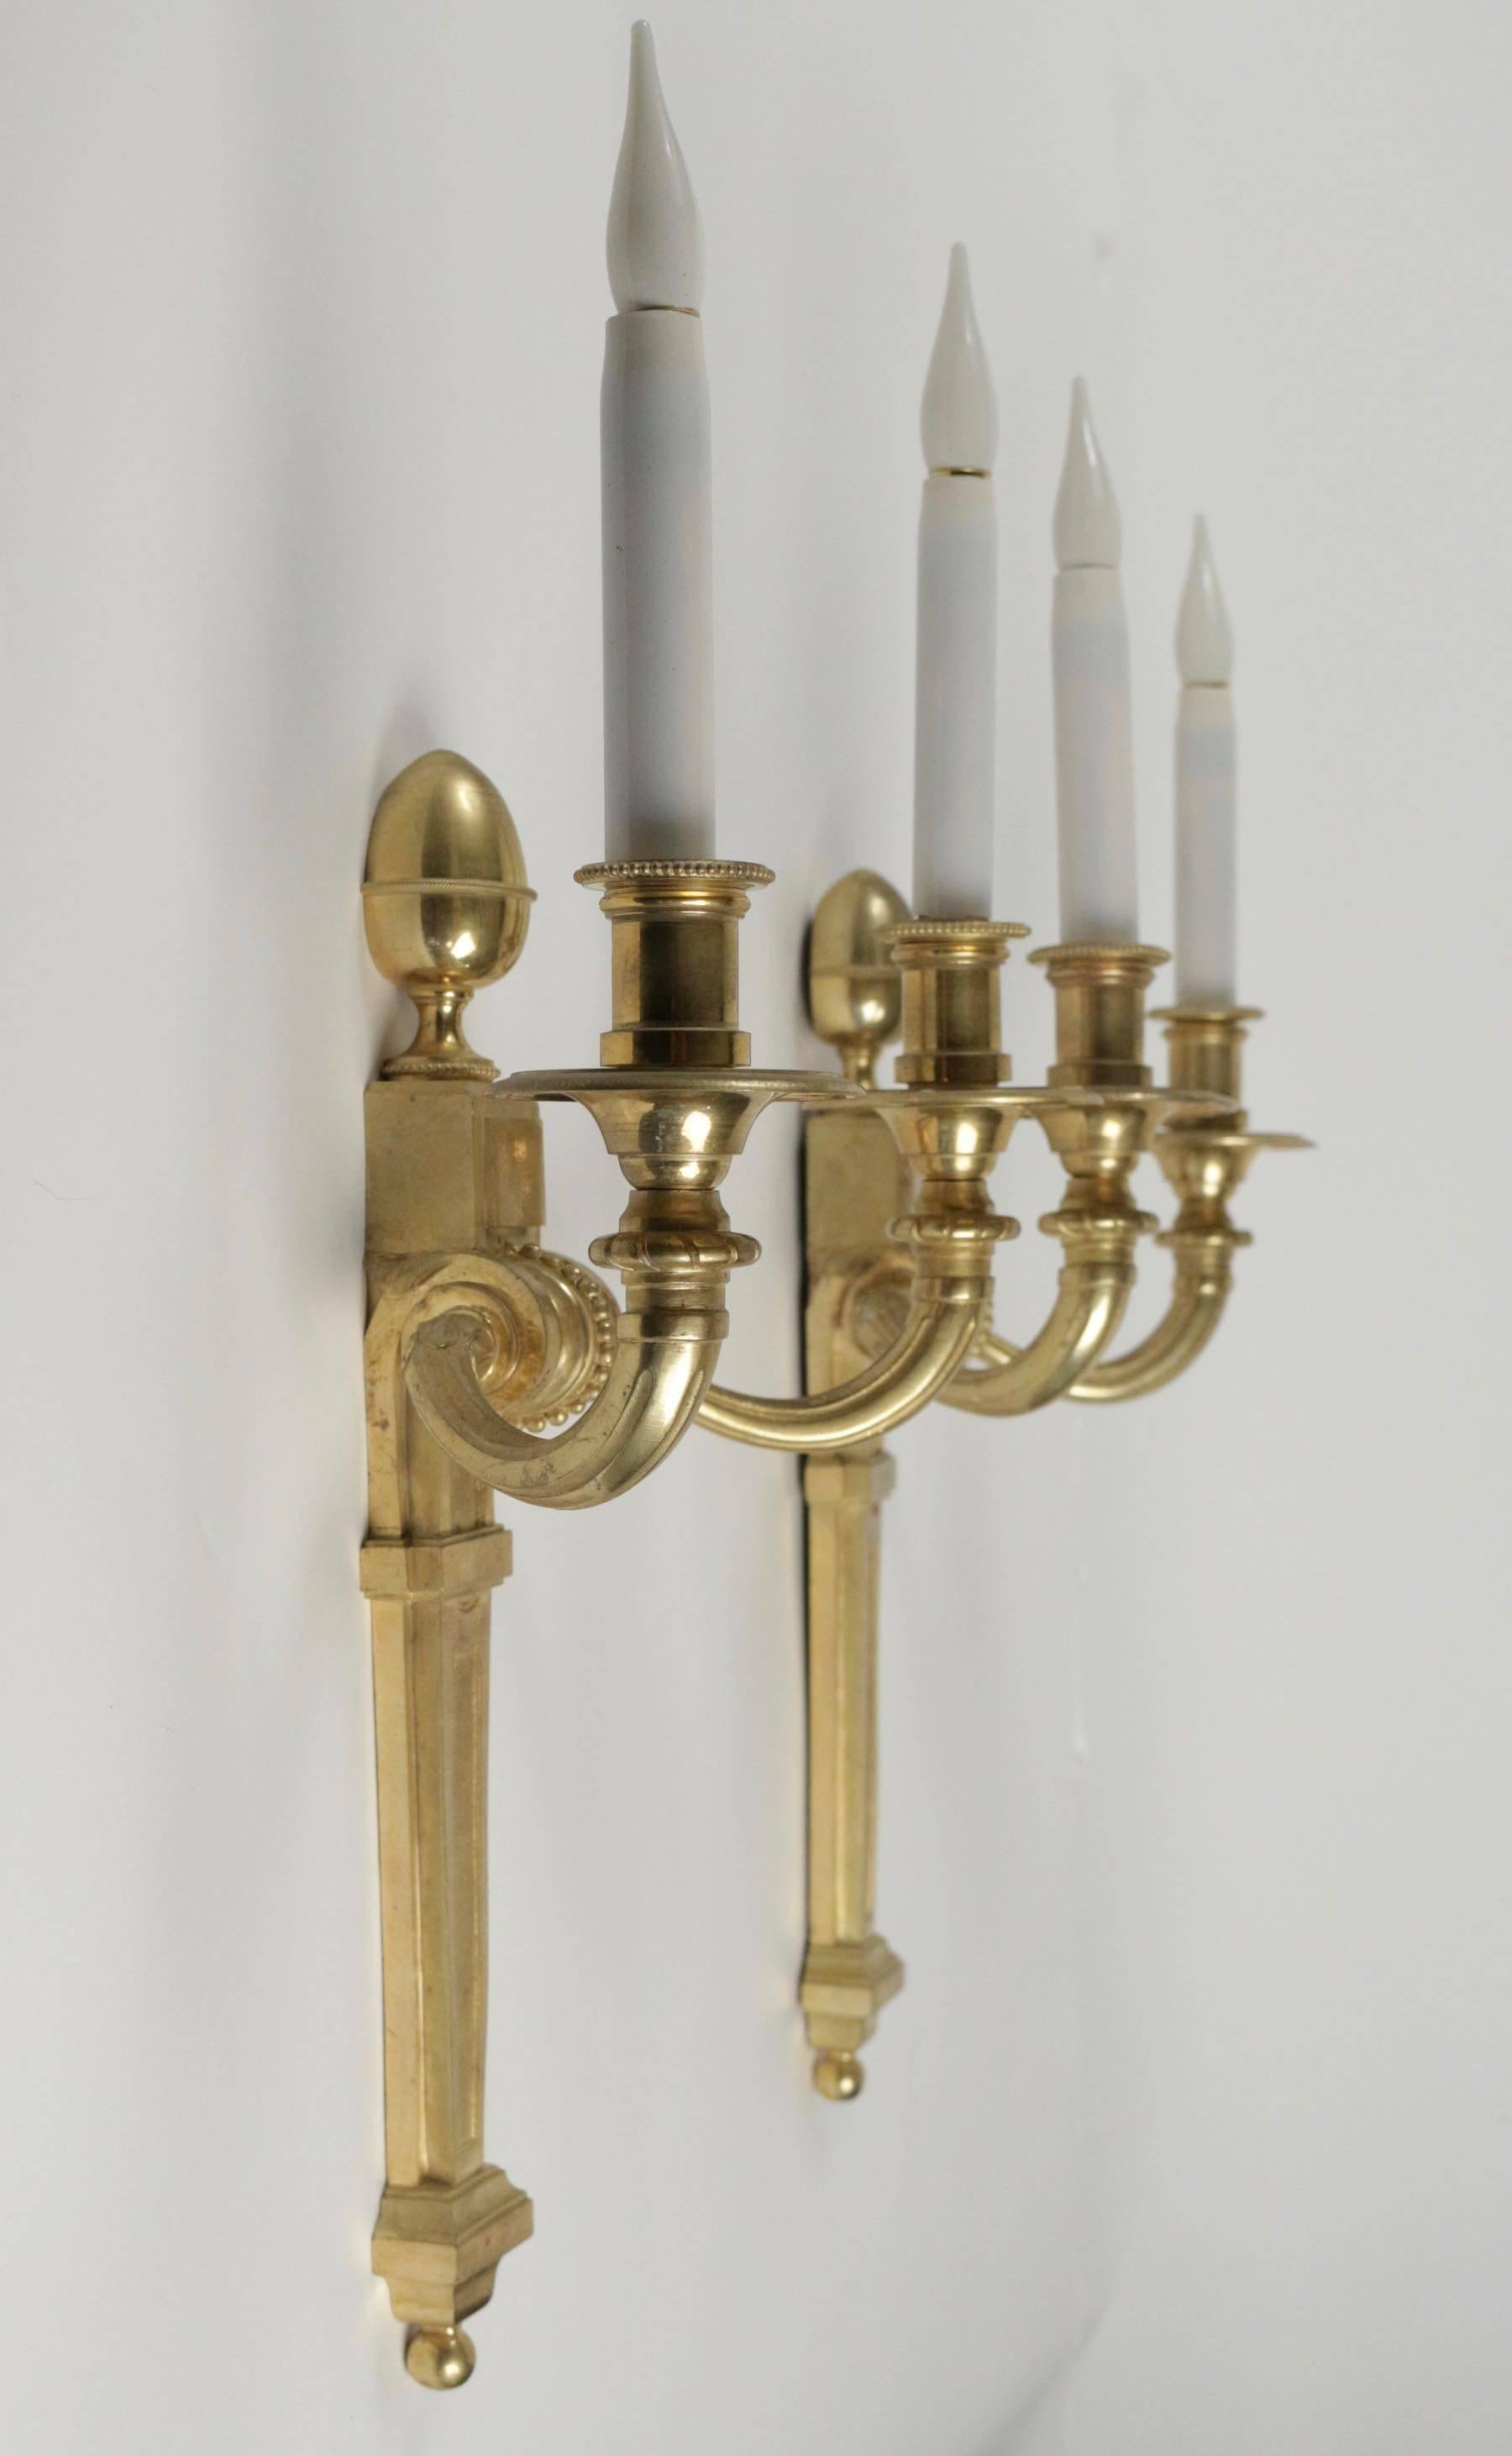 Pair of bronze doré sconces in the style of Louis XV from the 19th century, signed by the maker G.Van. Candlestick in opaline porcelaine. H: 43cm, L: 30cm, P: 17cm.
    